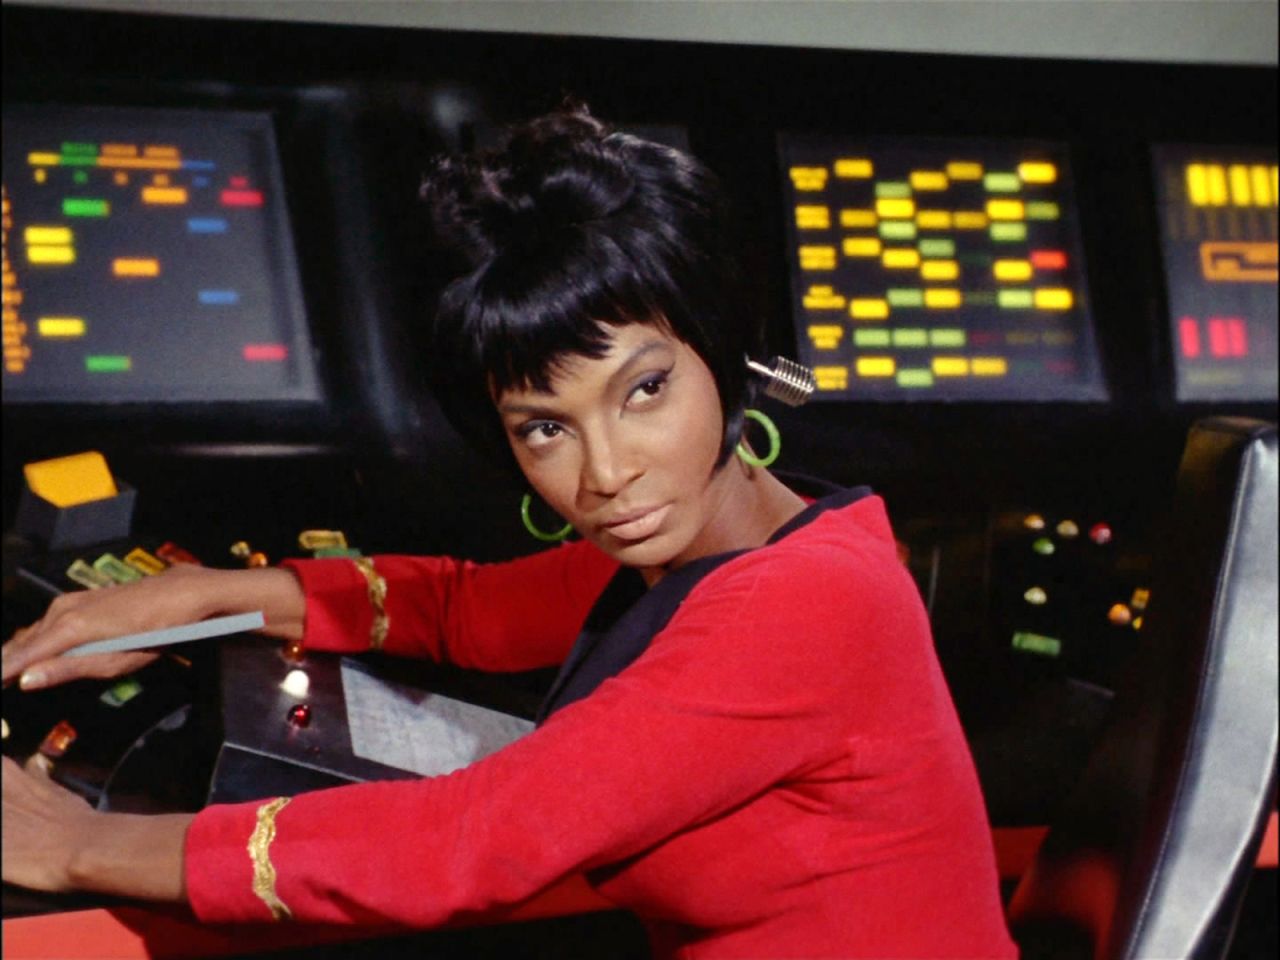 Actress and singer Nichelle Nichols, best known for her groundbreaking portrayal of Lt. Nyota Uhura in 